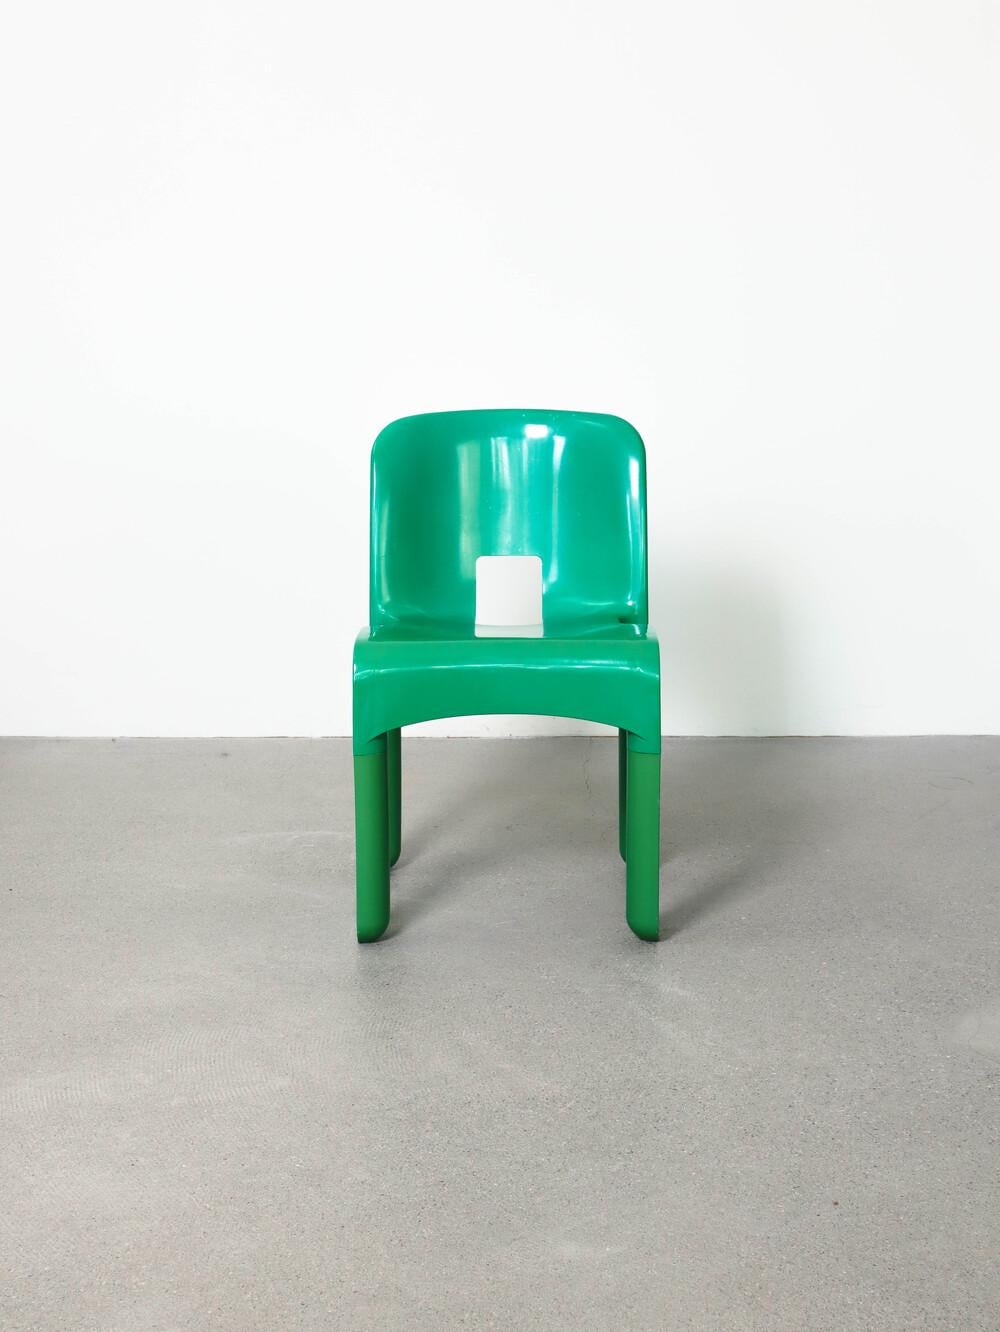 4867 Universale Chair by Joe Colombo for Kartell, 1970s
good condition
color: green